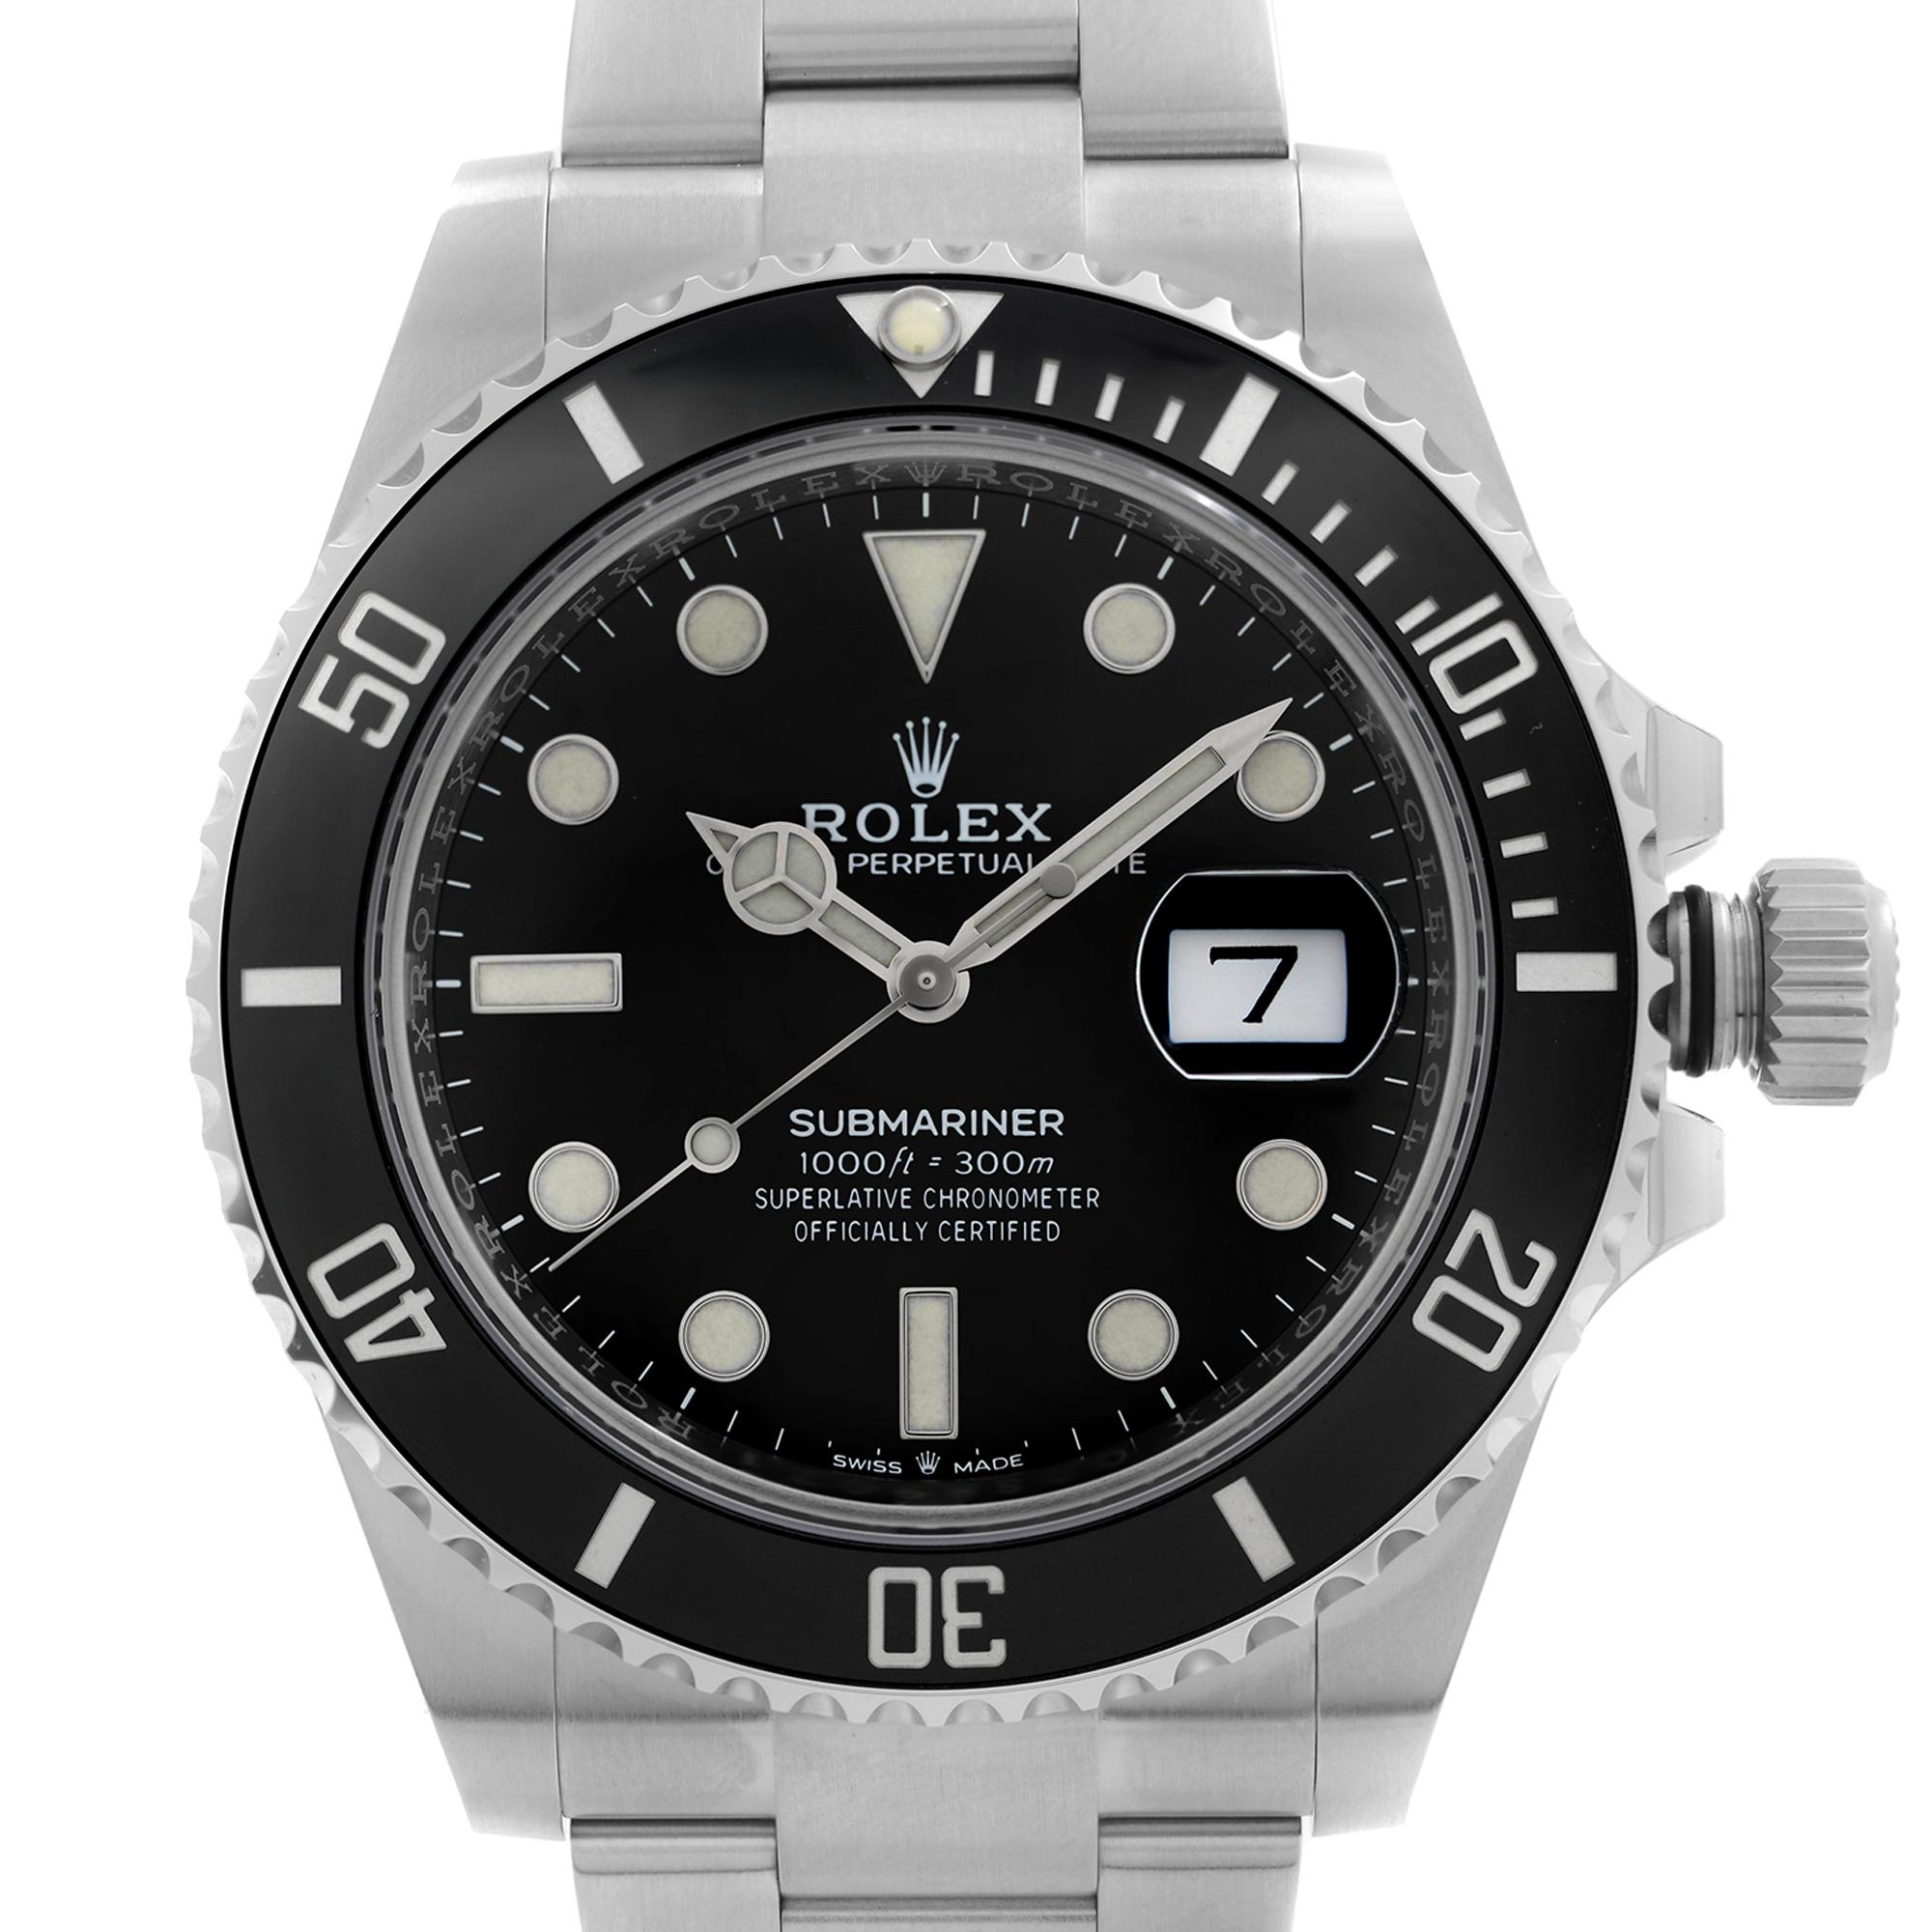 Unworn 2021 Rolex Submariner Date 41mm Steel Ceramic Black Dial Automatic Men Watch 126610LN. This Beautiful Timepiece is Powered by Mechanical (Automatic) Movement And Features: Polished Steel Round Case and Rolex Oyster Bracelet. Uni-Directional